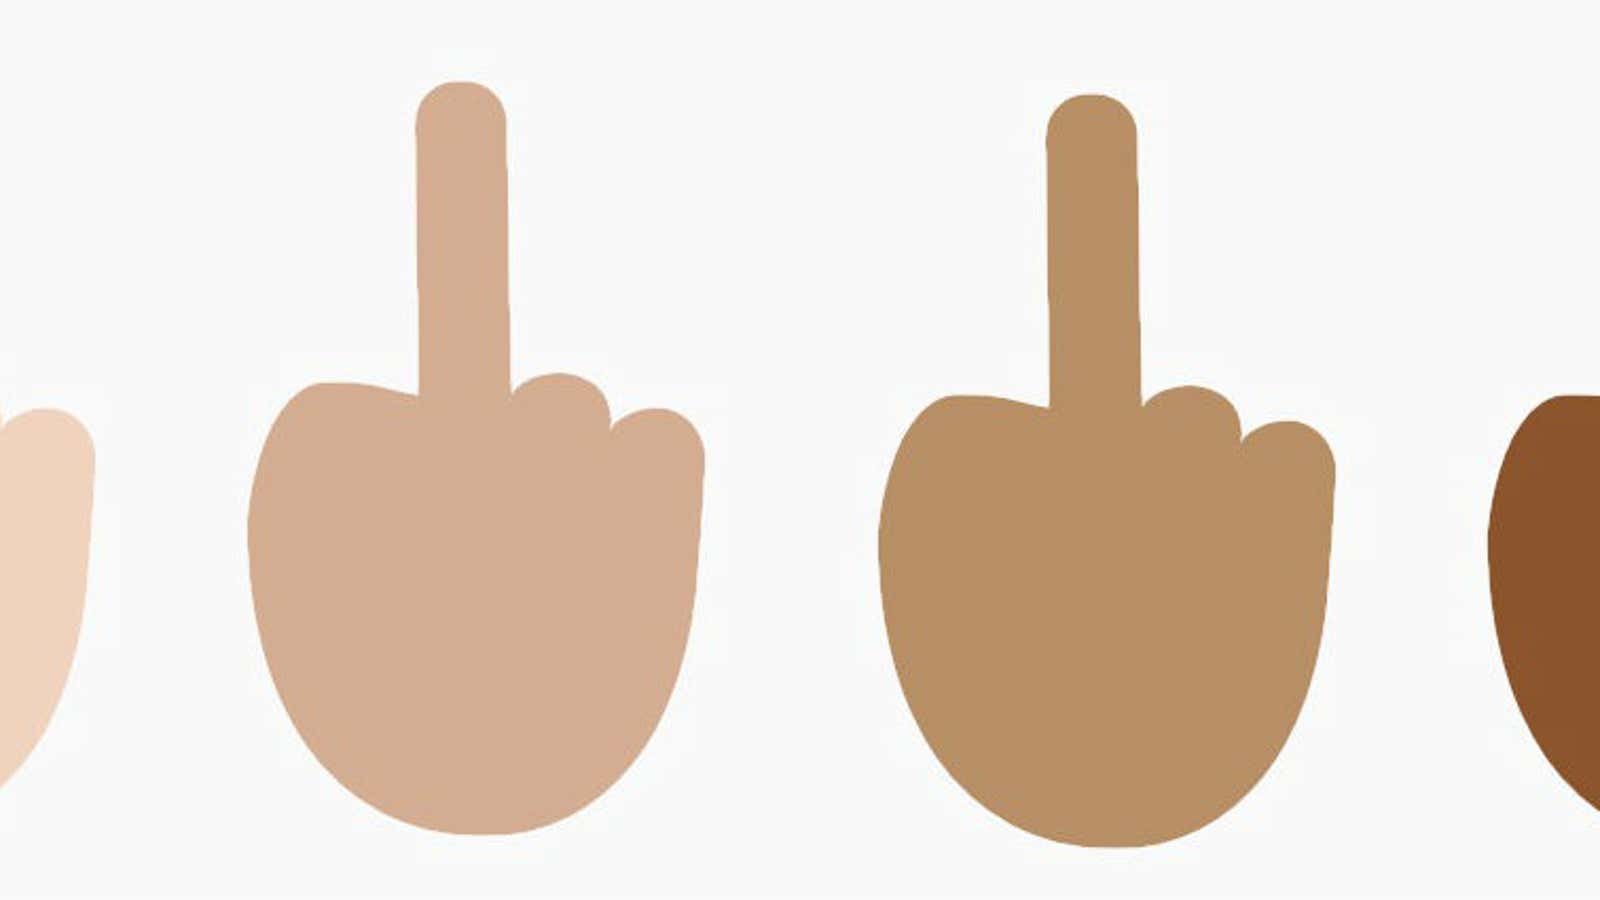 Microsoft is the only tech company daring enough to support the middle finger emoji